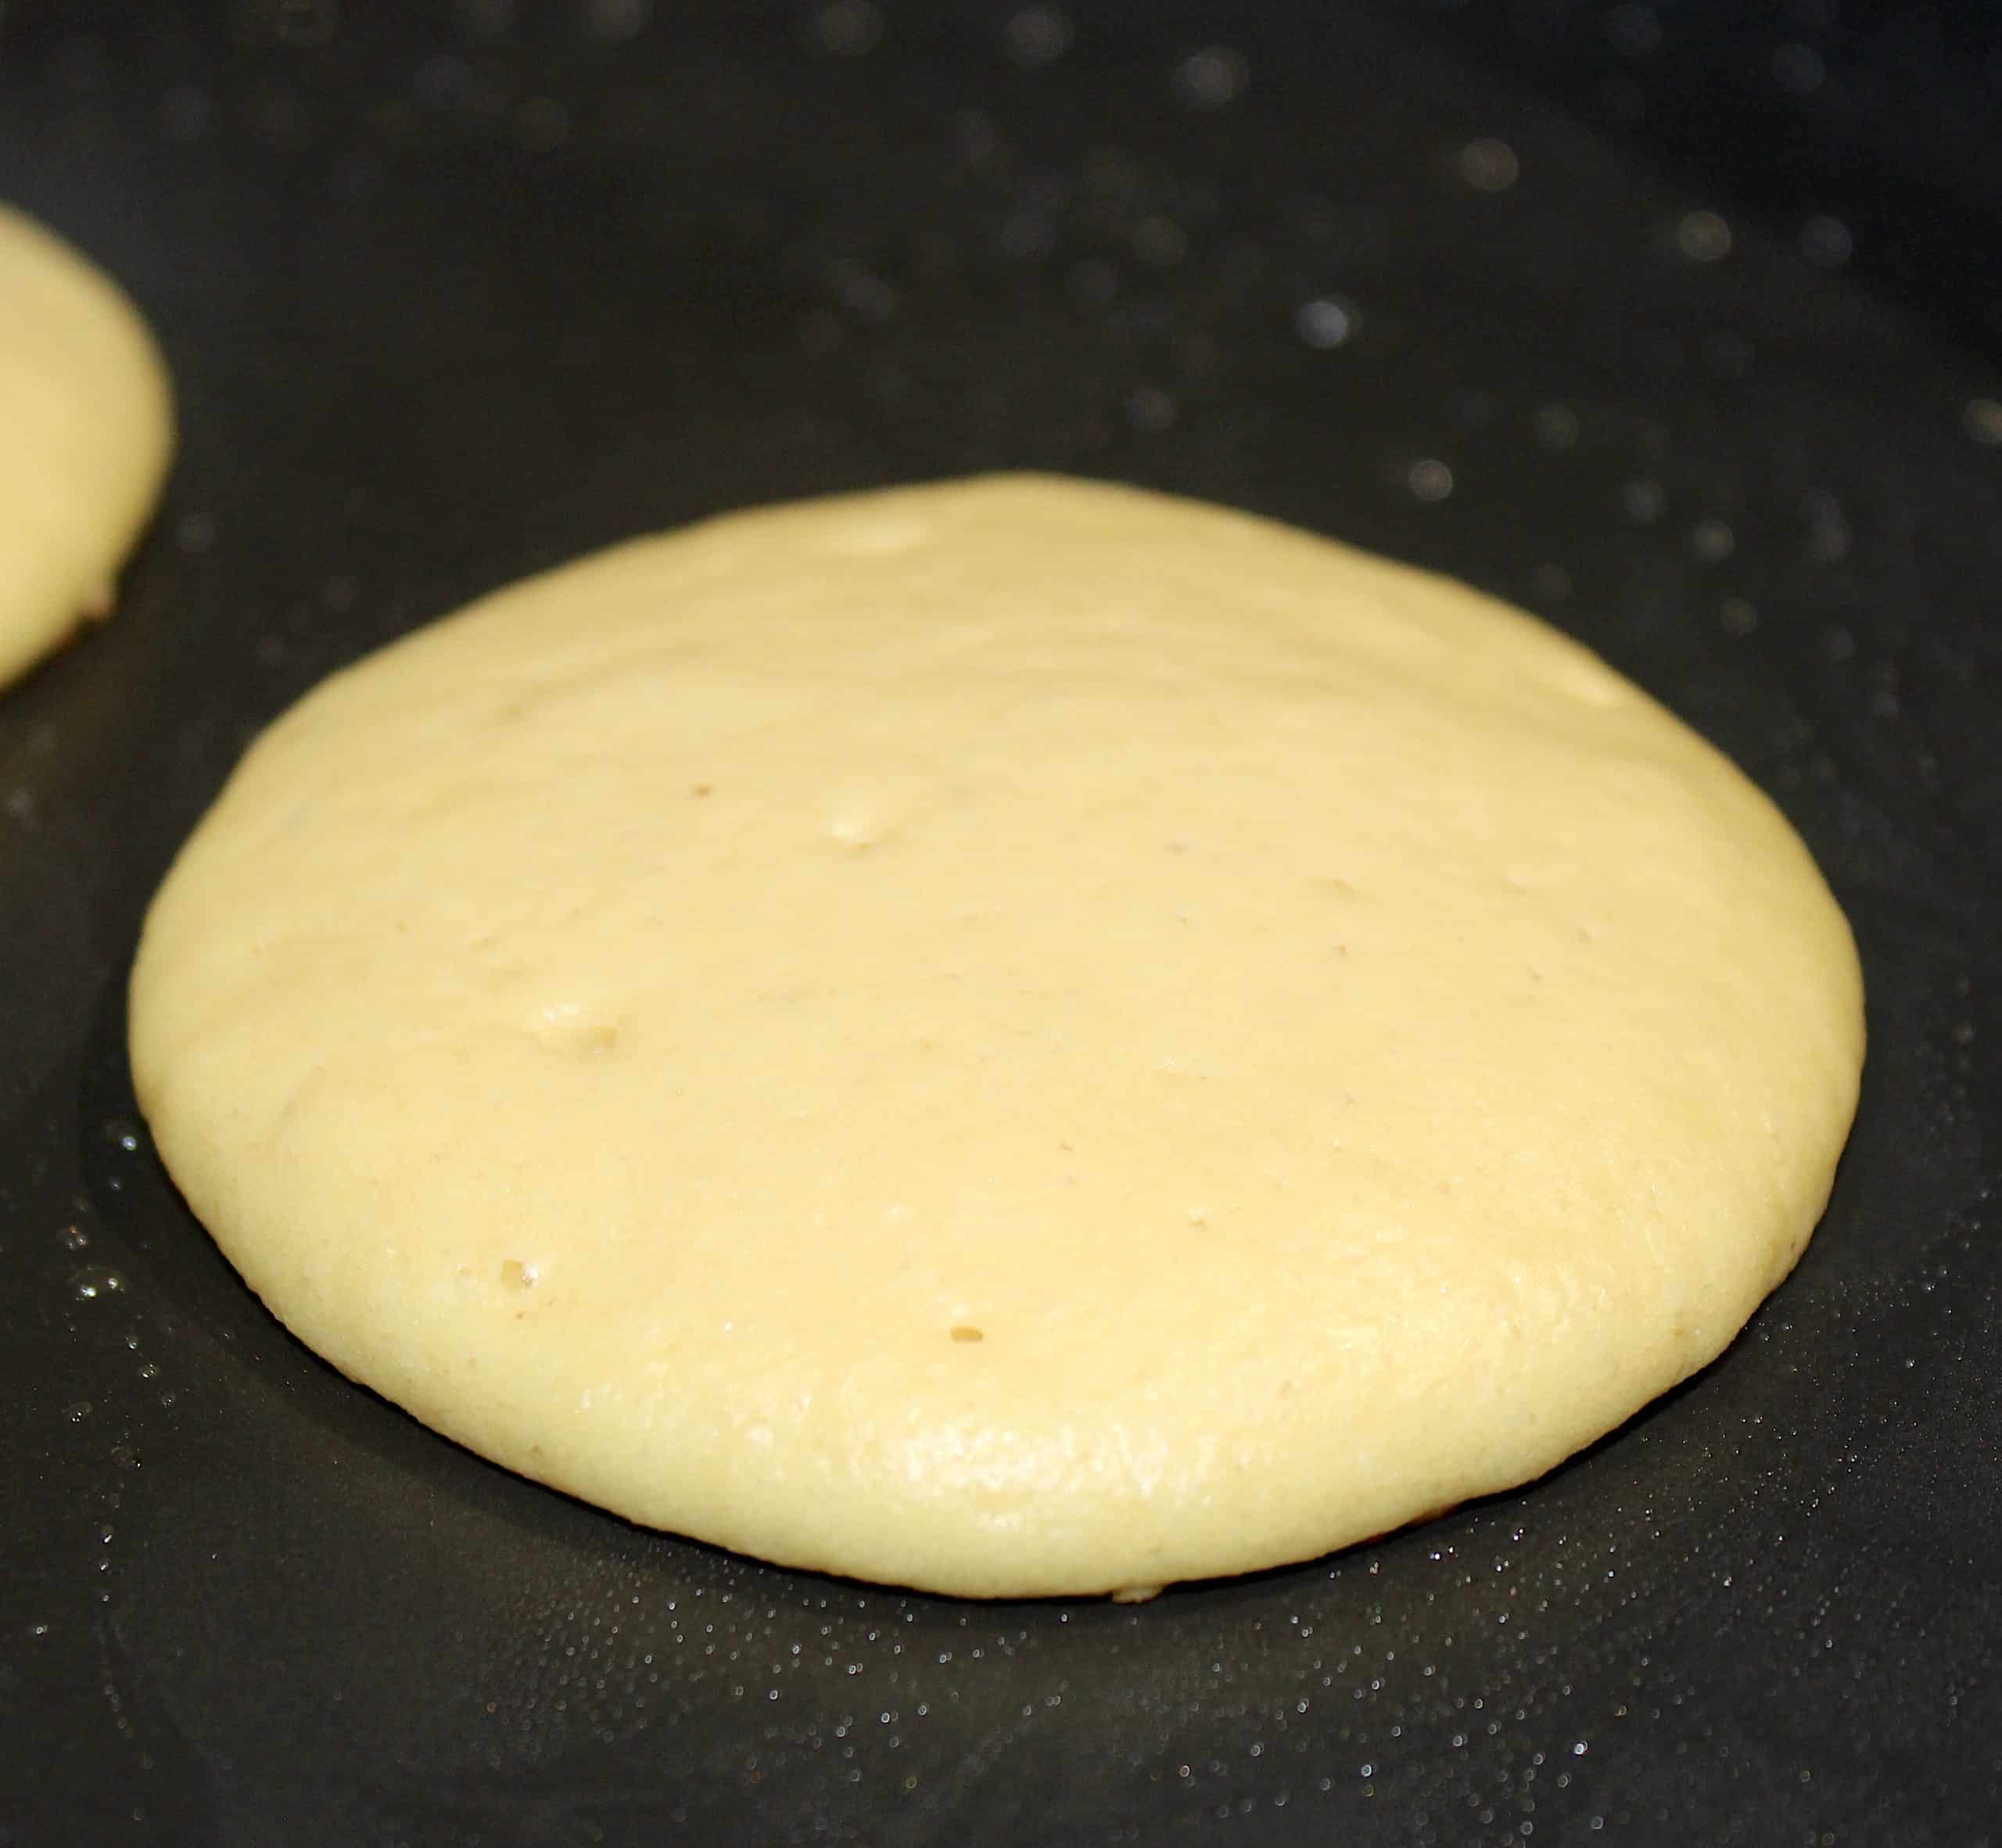 uncooked pancake in skillet